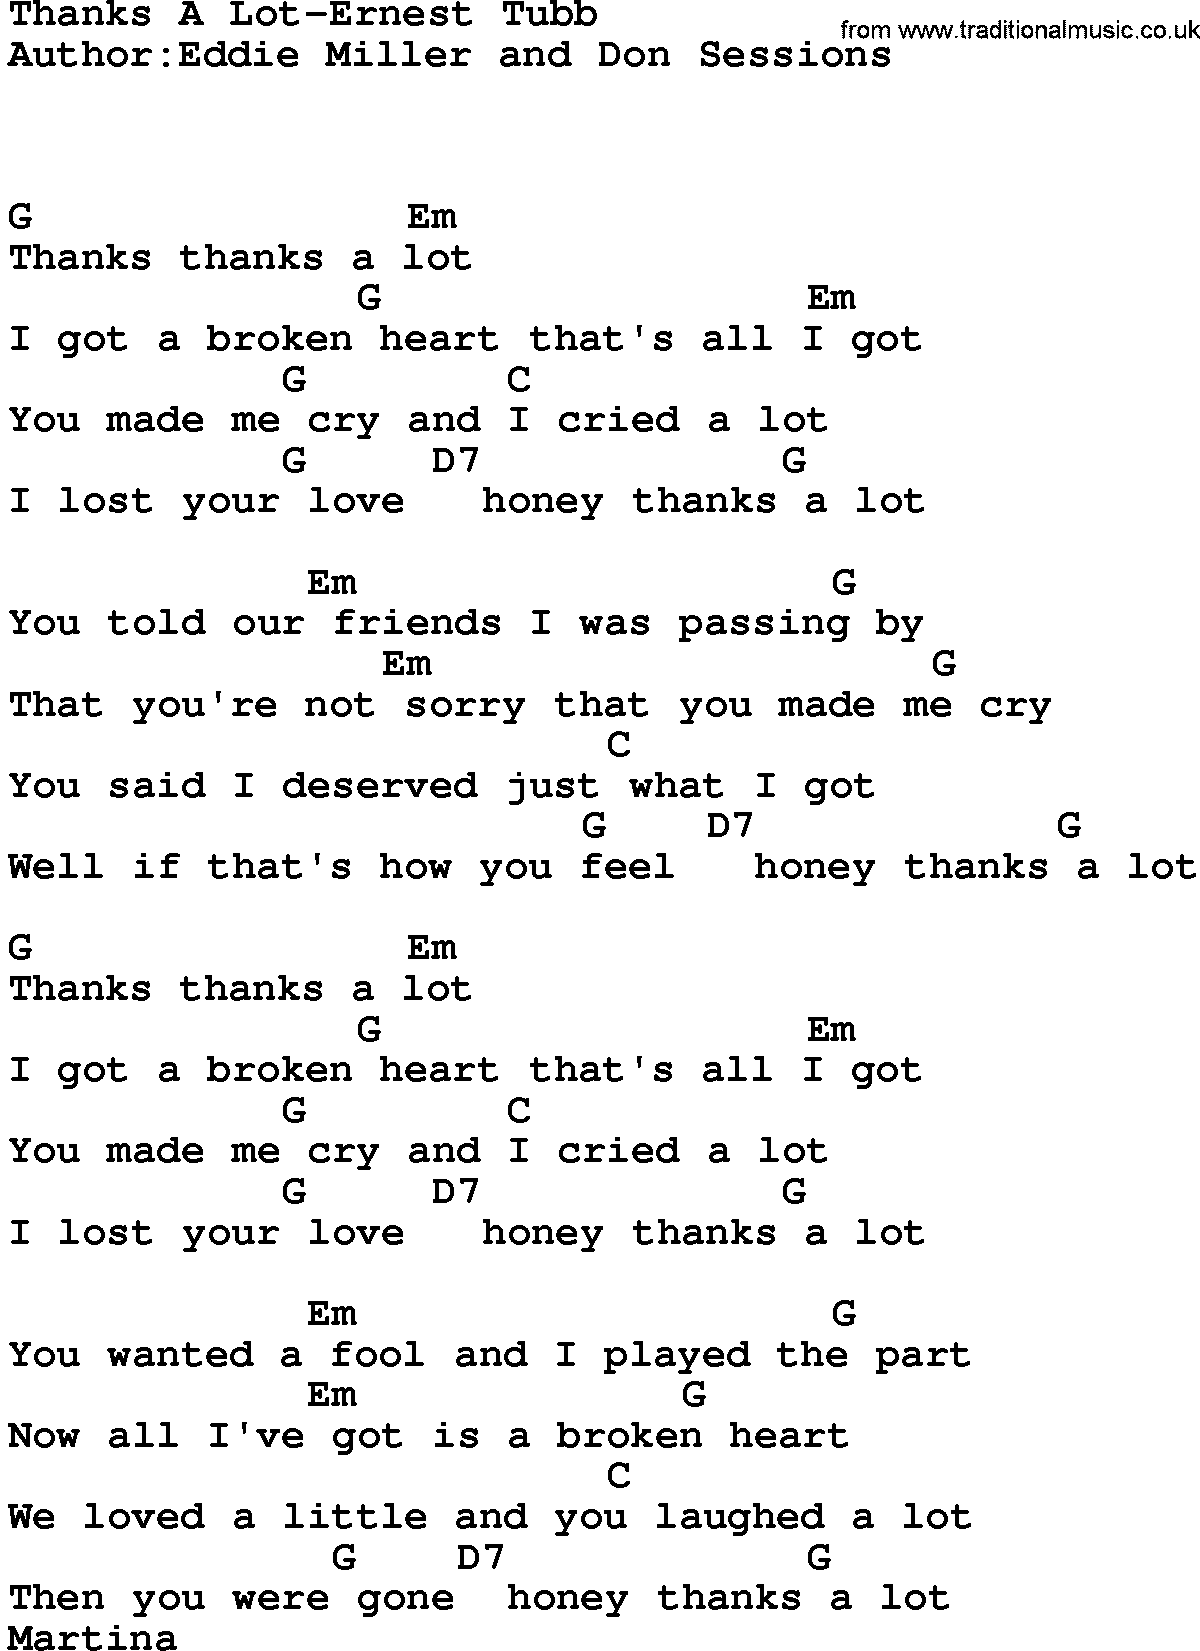 Country music song: Thanks A Lot-Ernest Tubb lyrics and chords